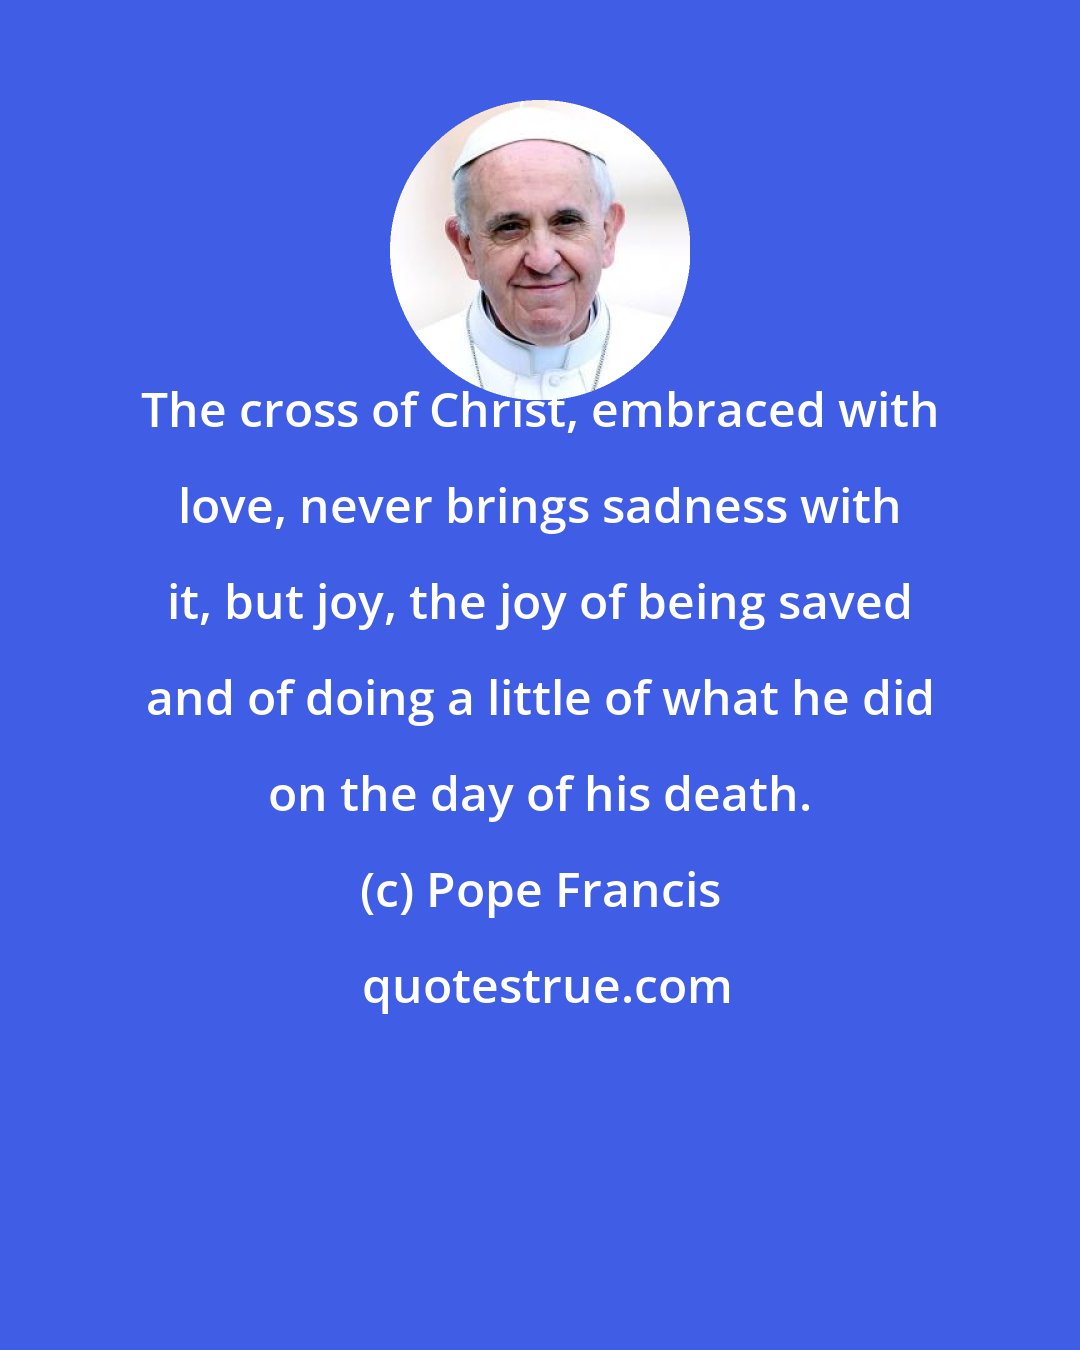 Pope Francis: The cross of Christ, embraced with love, never brings sadness with it, but joy, the joy of being saved and of doing a little of what he did on the day of his death.